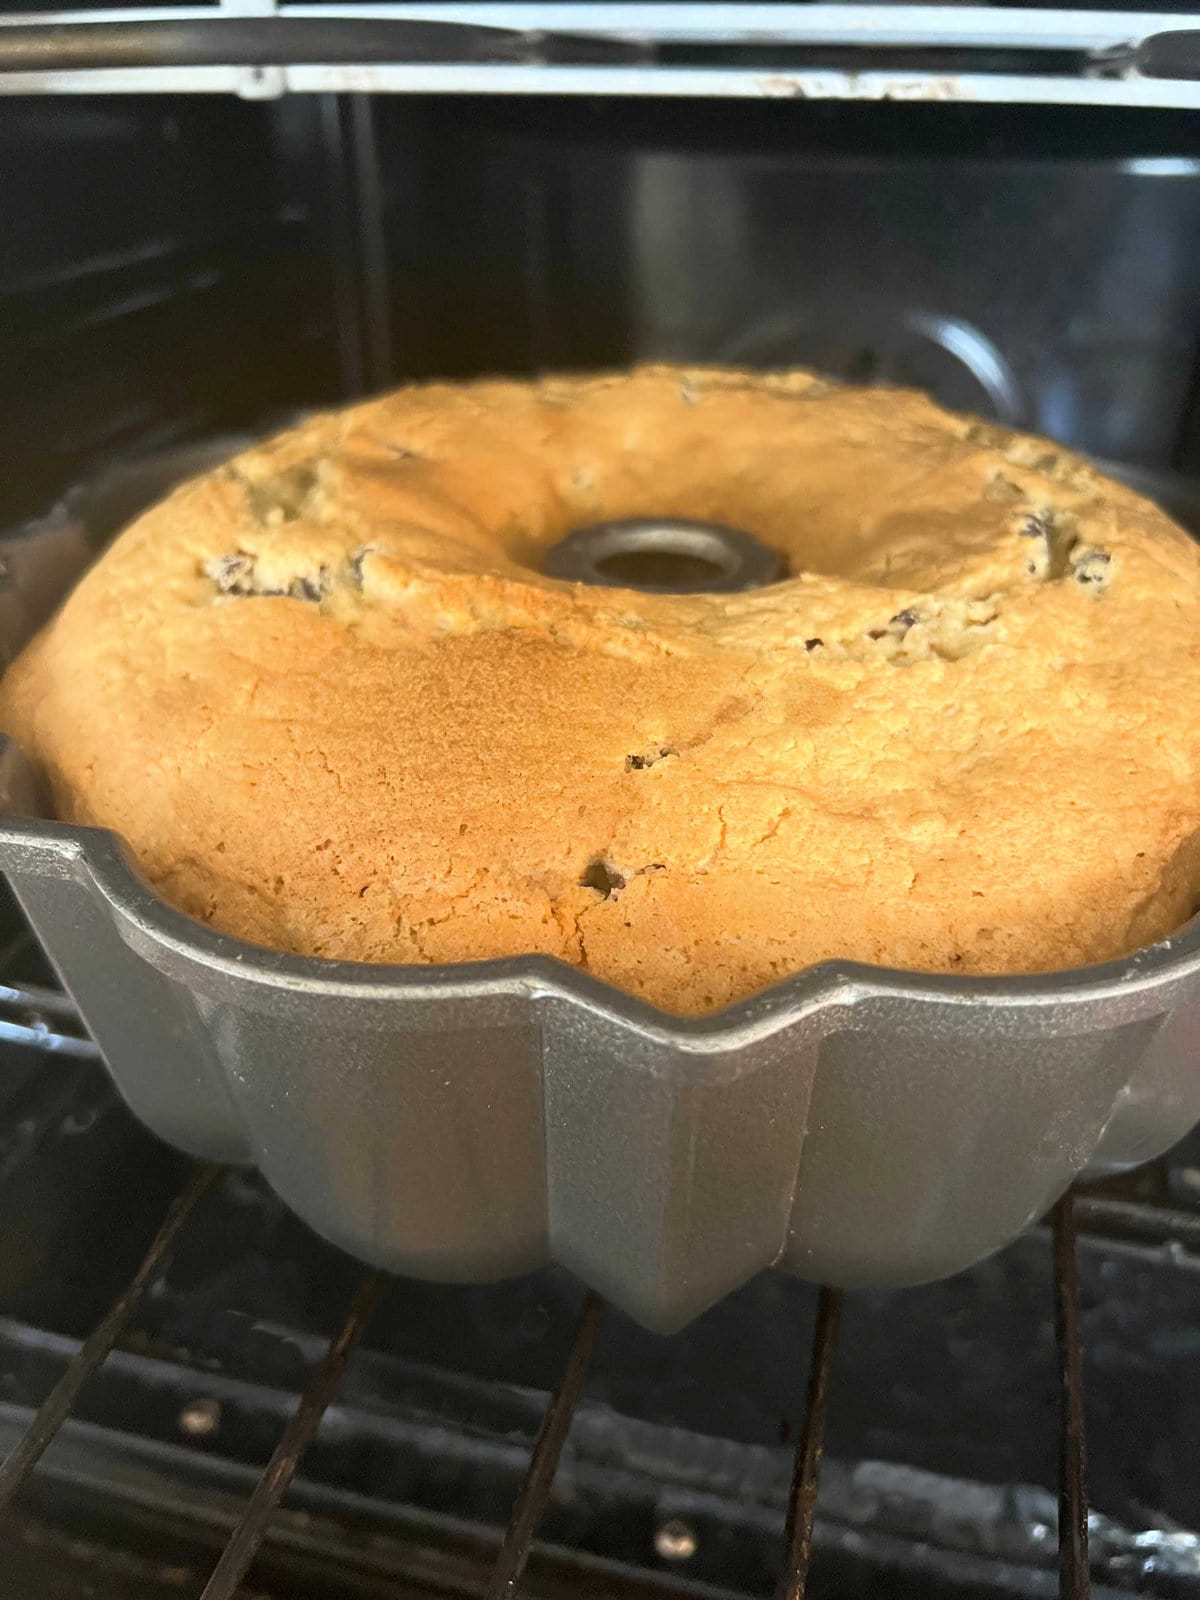 Baked Chocolate Chip Pound Cake, coming out of the oven